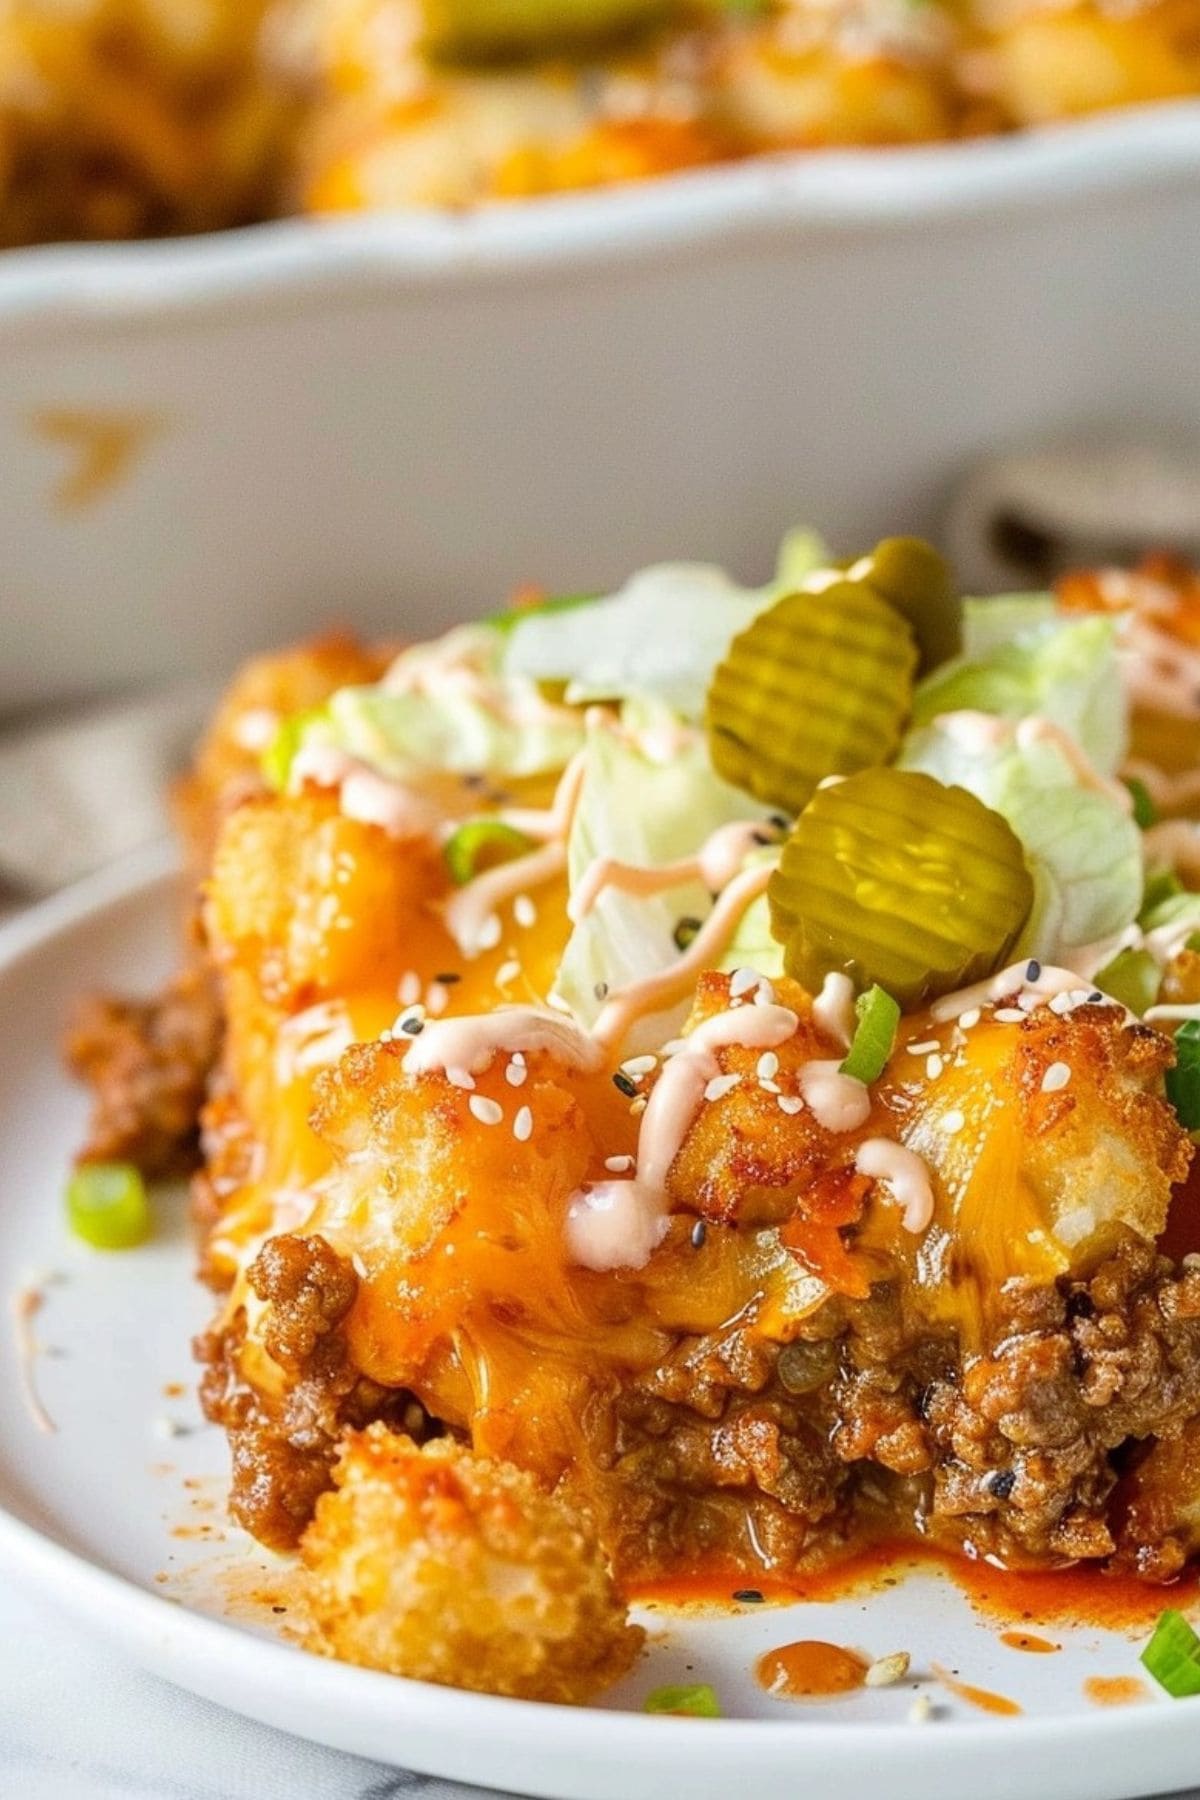 A slice serving of Big mac casserole with tater tots, onions, pickles, cheese, lettuce, and Thousand Island dressing.
